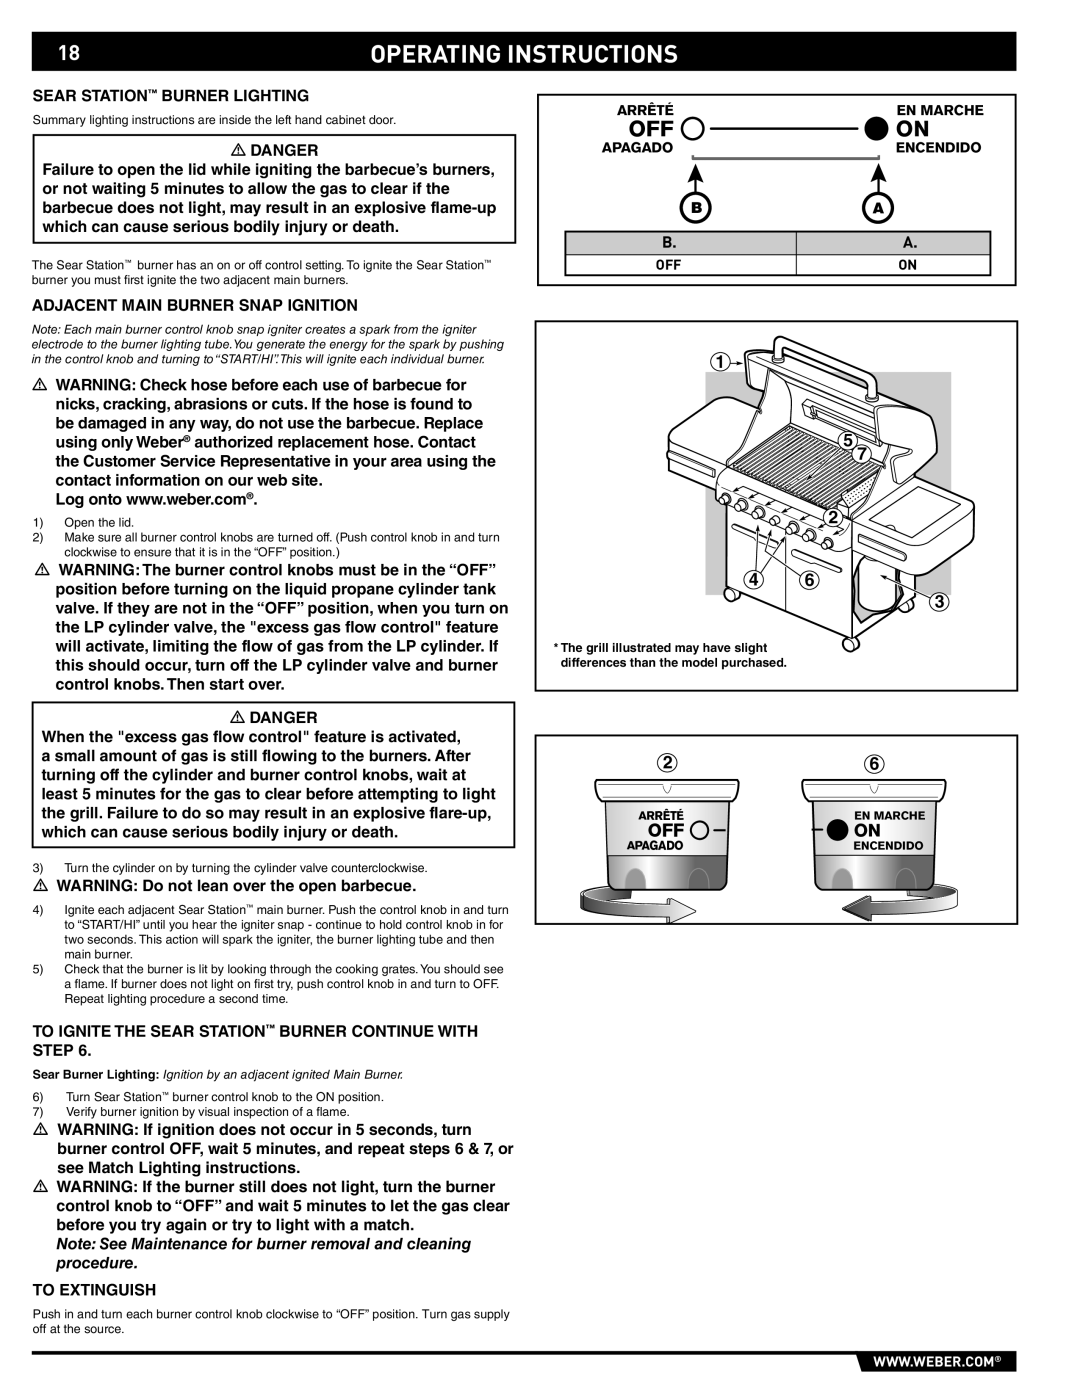 Summit 89190 manual Operating Instructions, Note See Maintenance for burner removal and cleaning procedure 